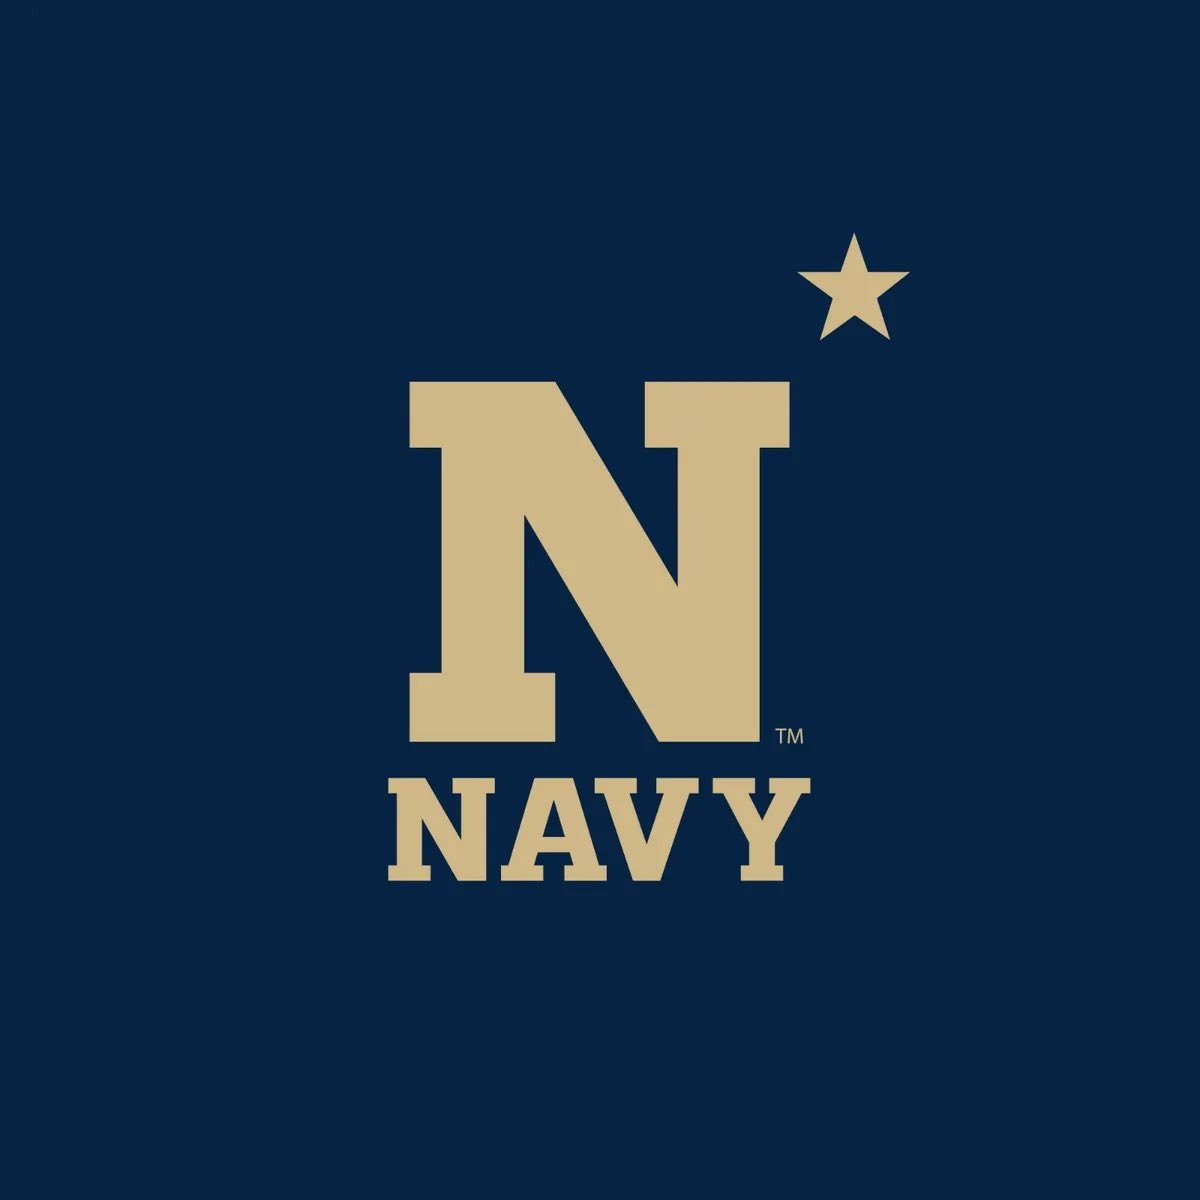 Extremely honored to receive an offer from The United States Naval Academy! #GoNavy